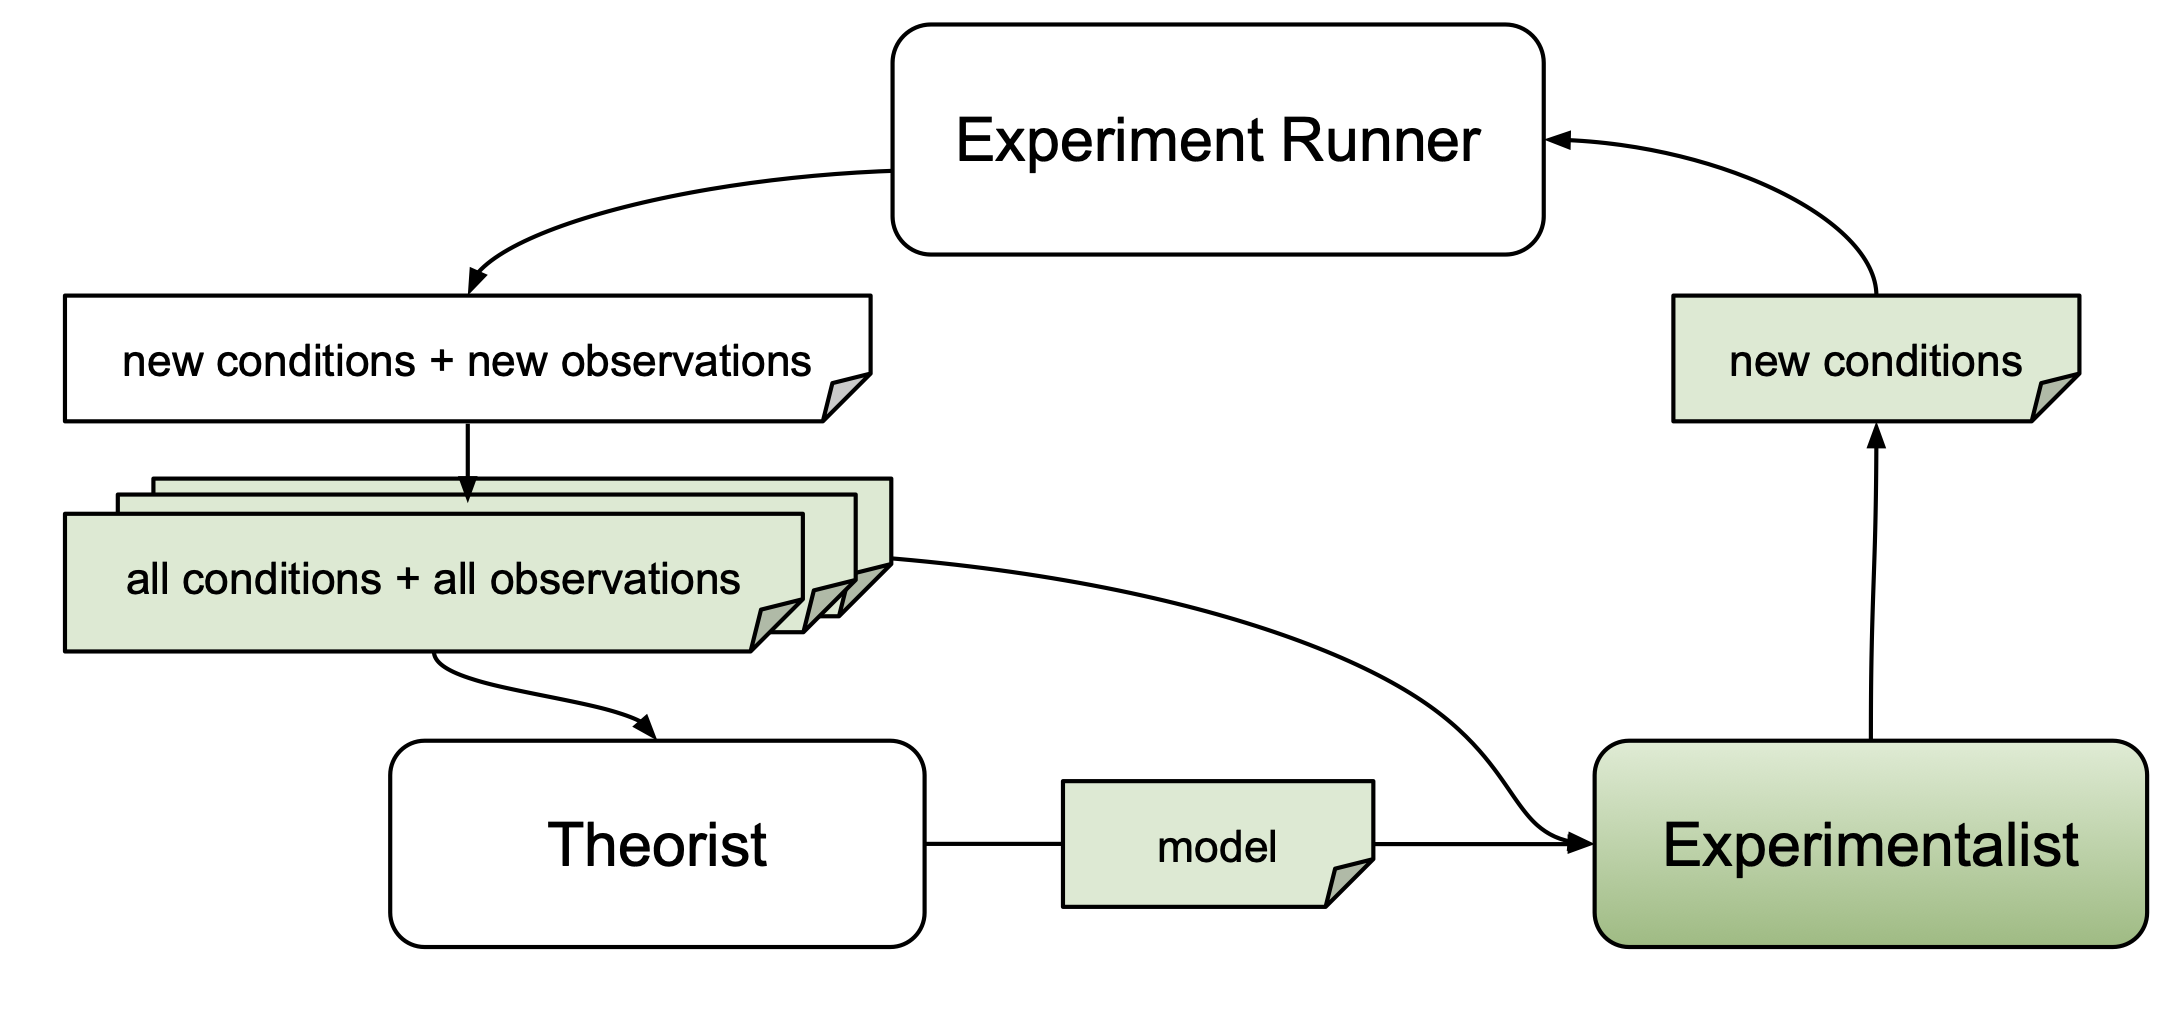 Experimentalist Overview